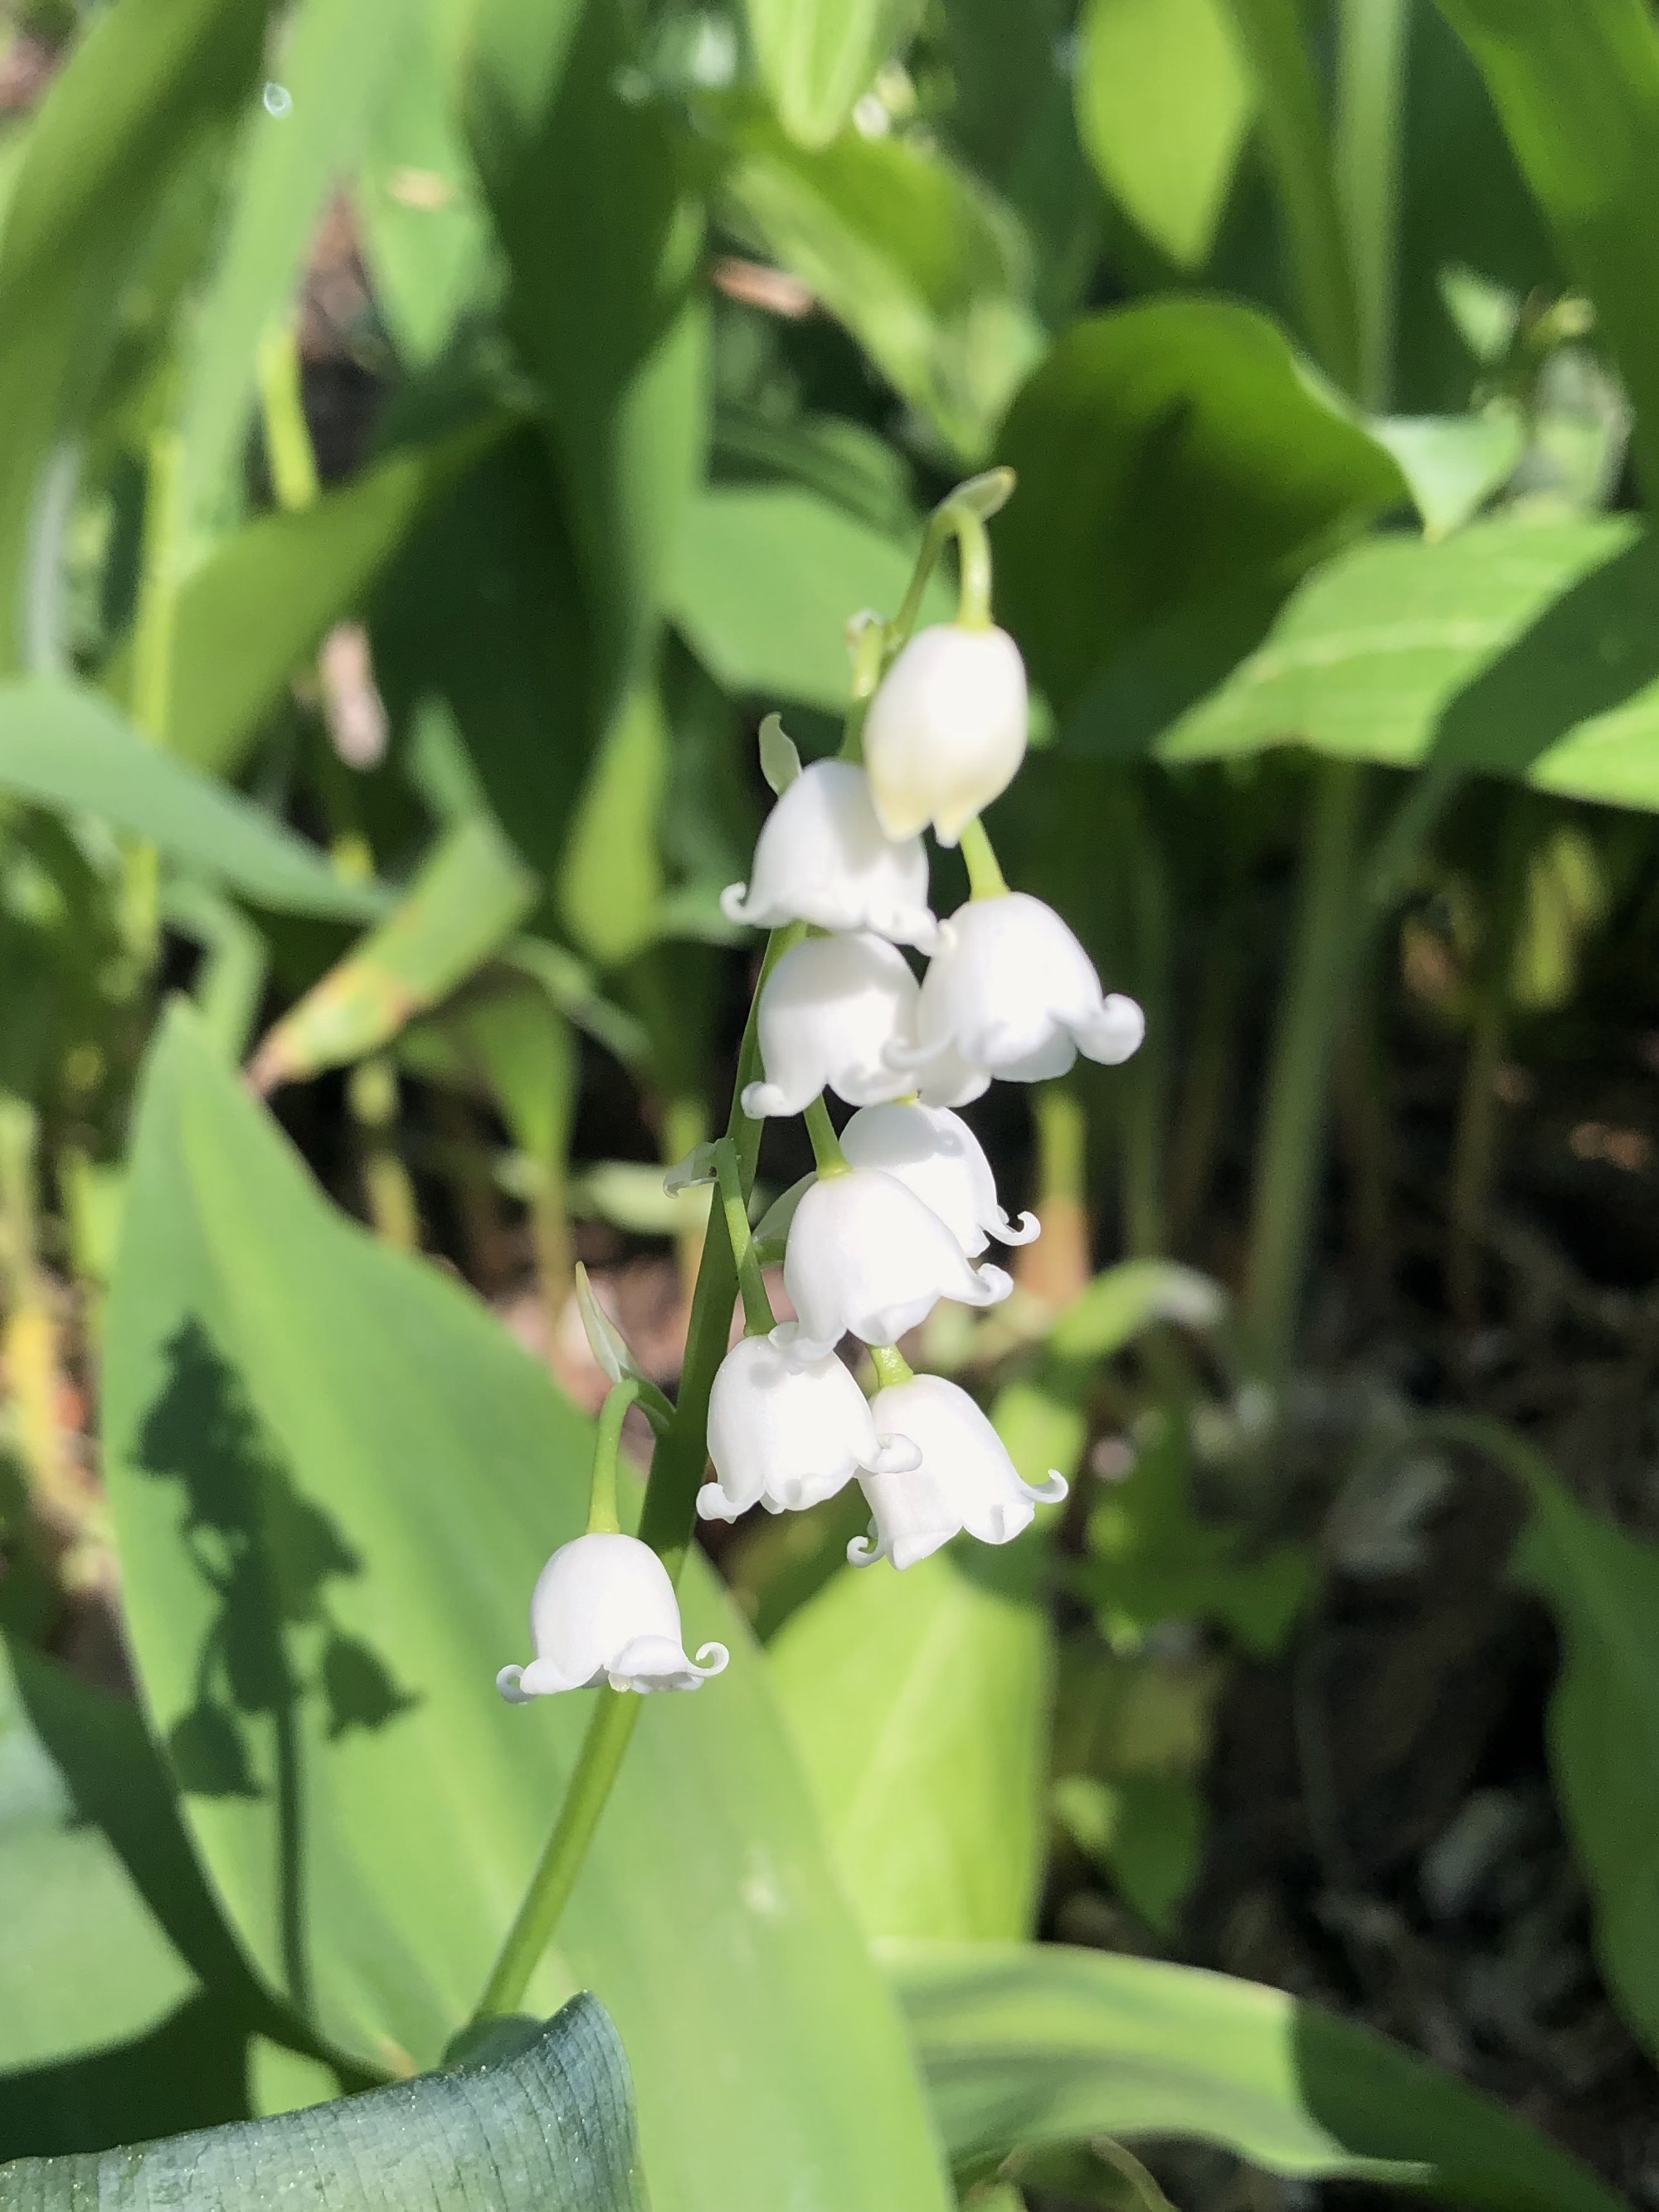  Lily of The Valley in Oak Savanna by Council Ring in on May 5, 2021.